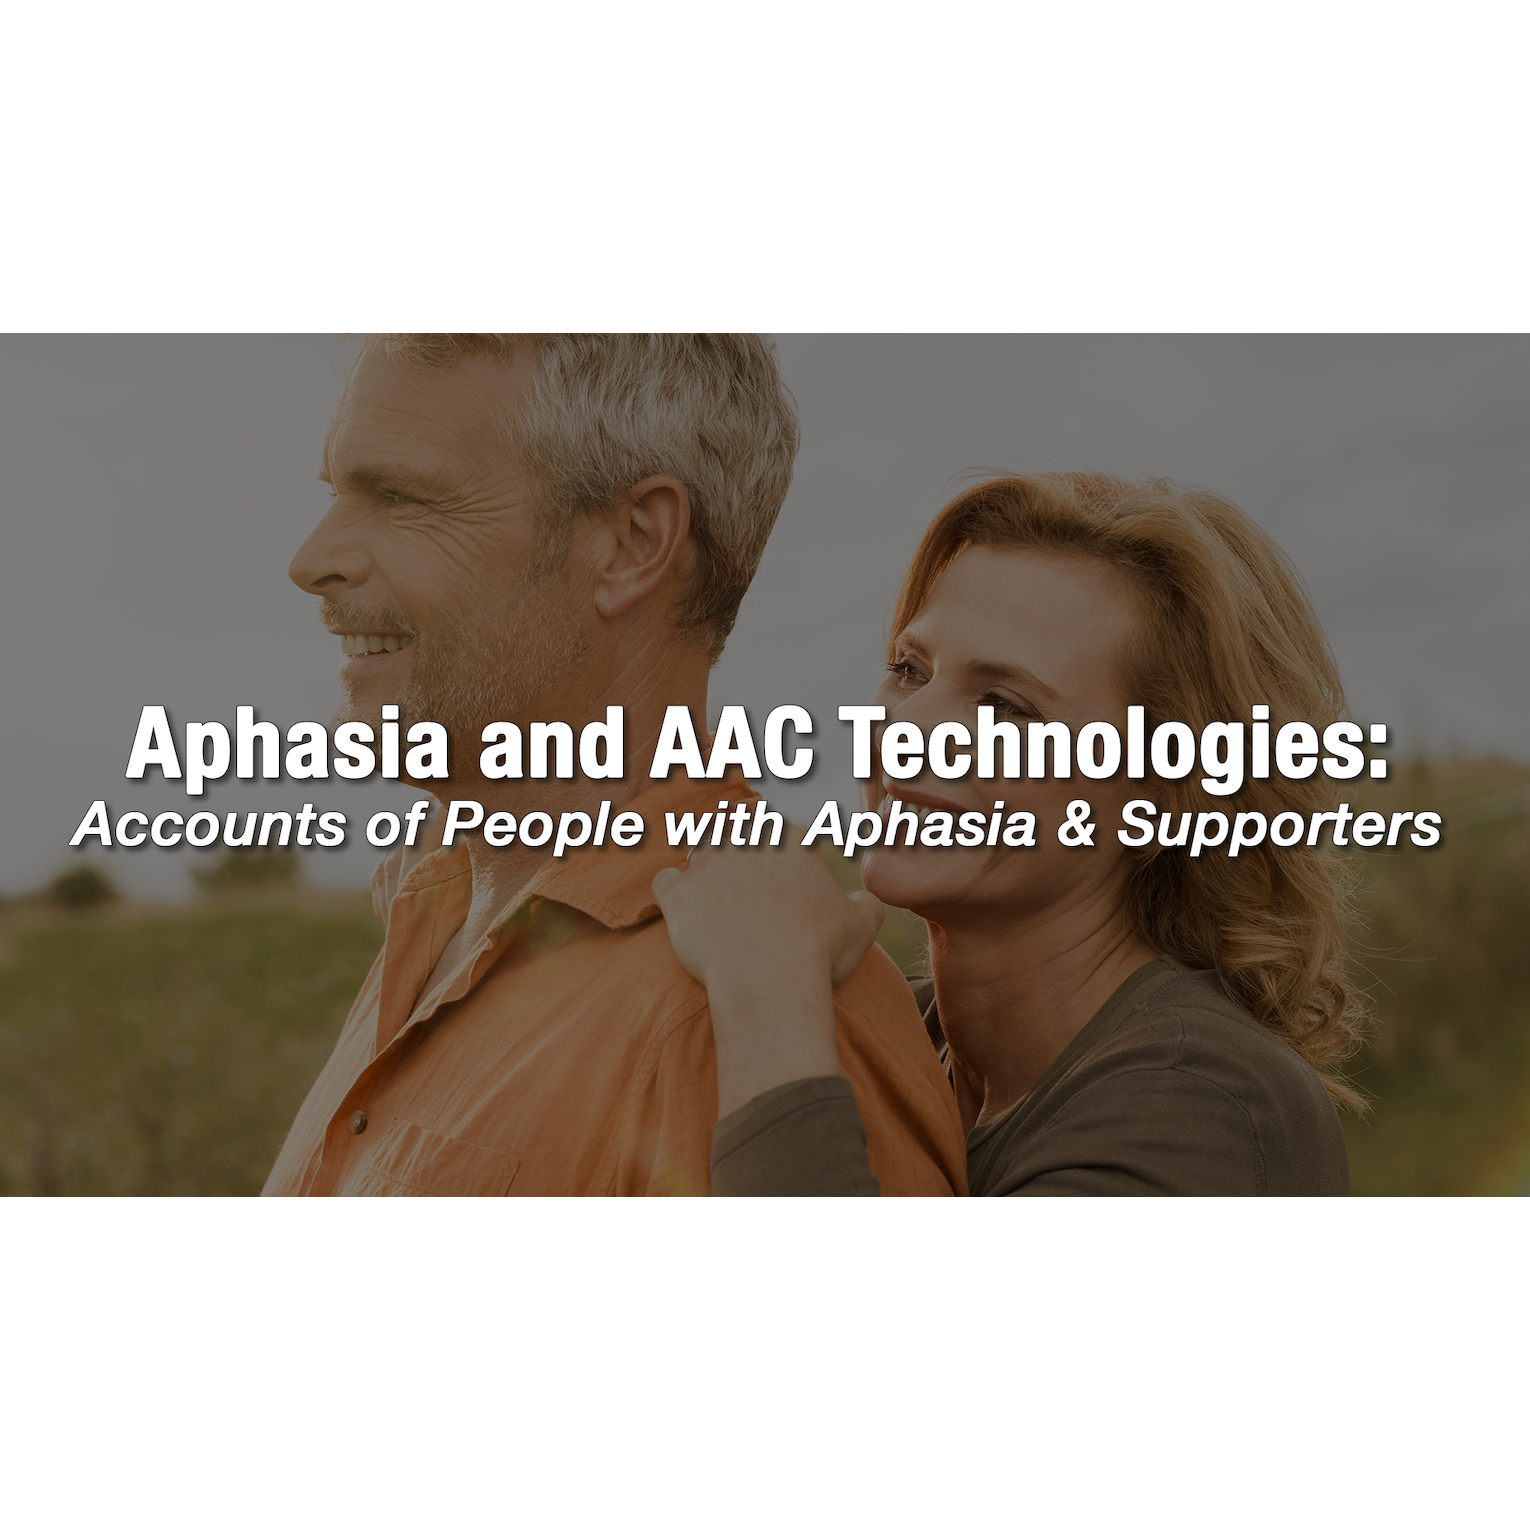 Aphasia and AAC Technologies: Accounts of People with Aphasia & Supporters